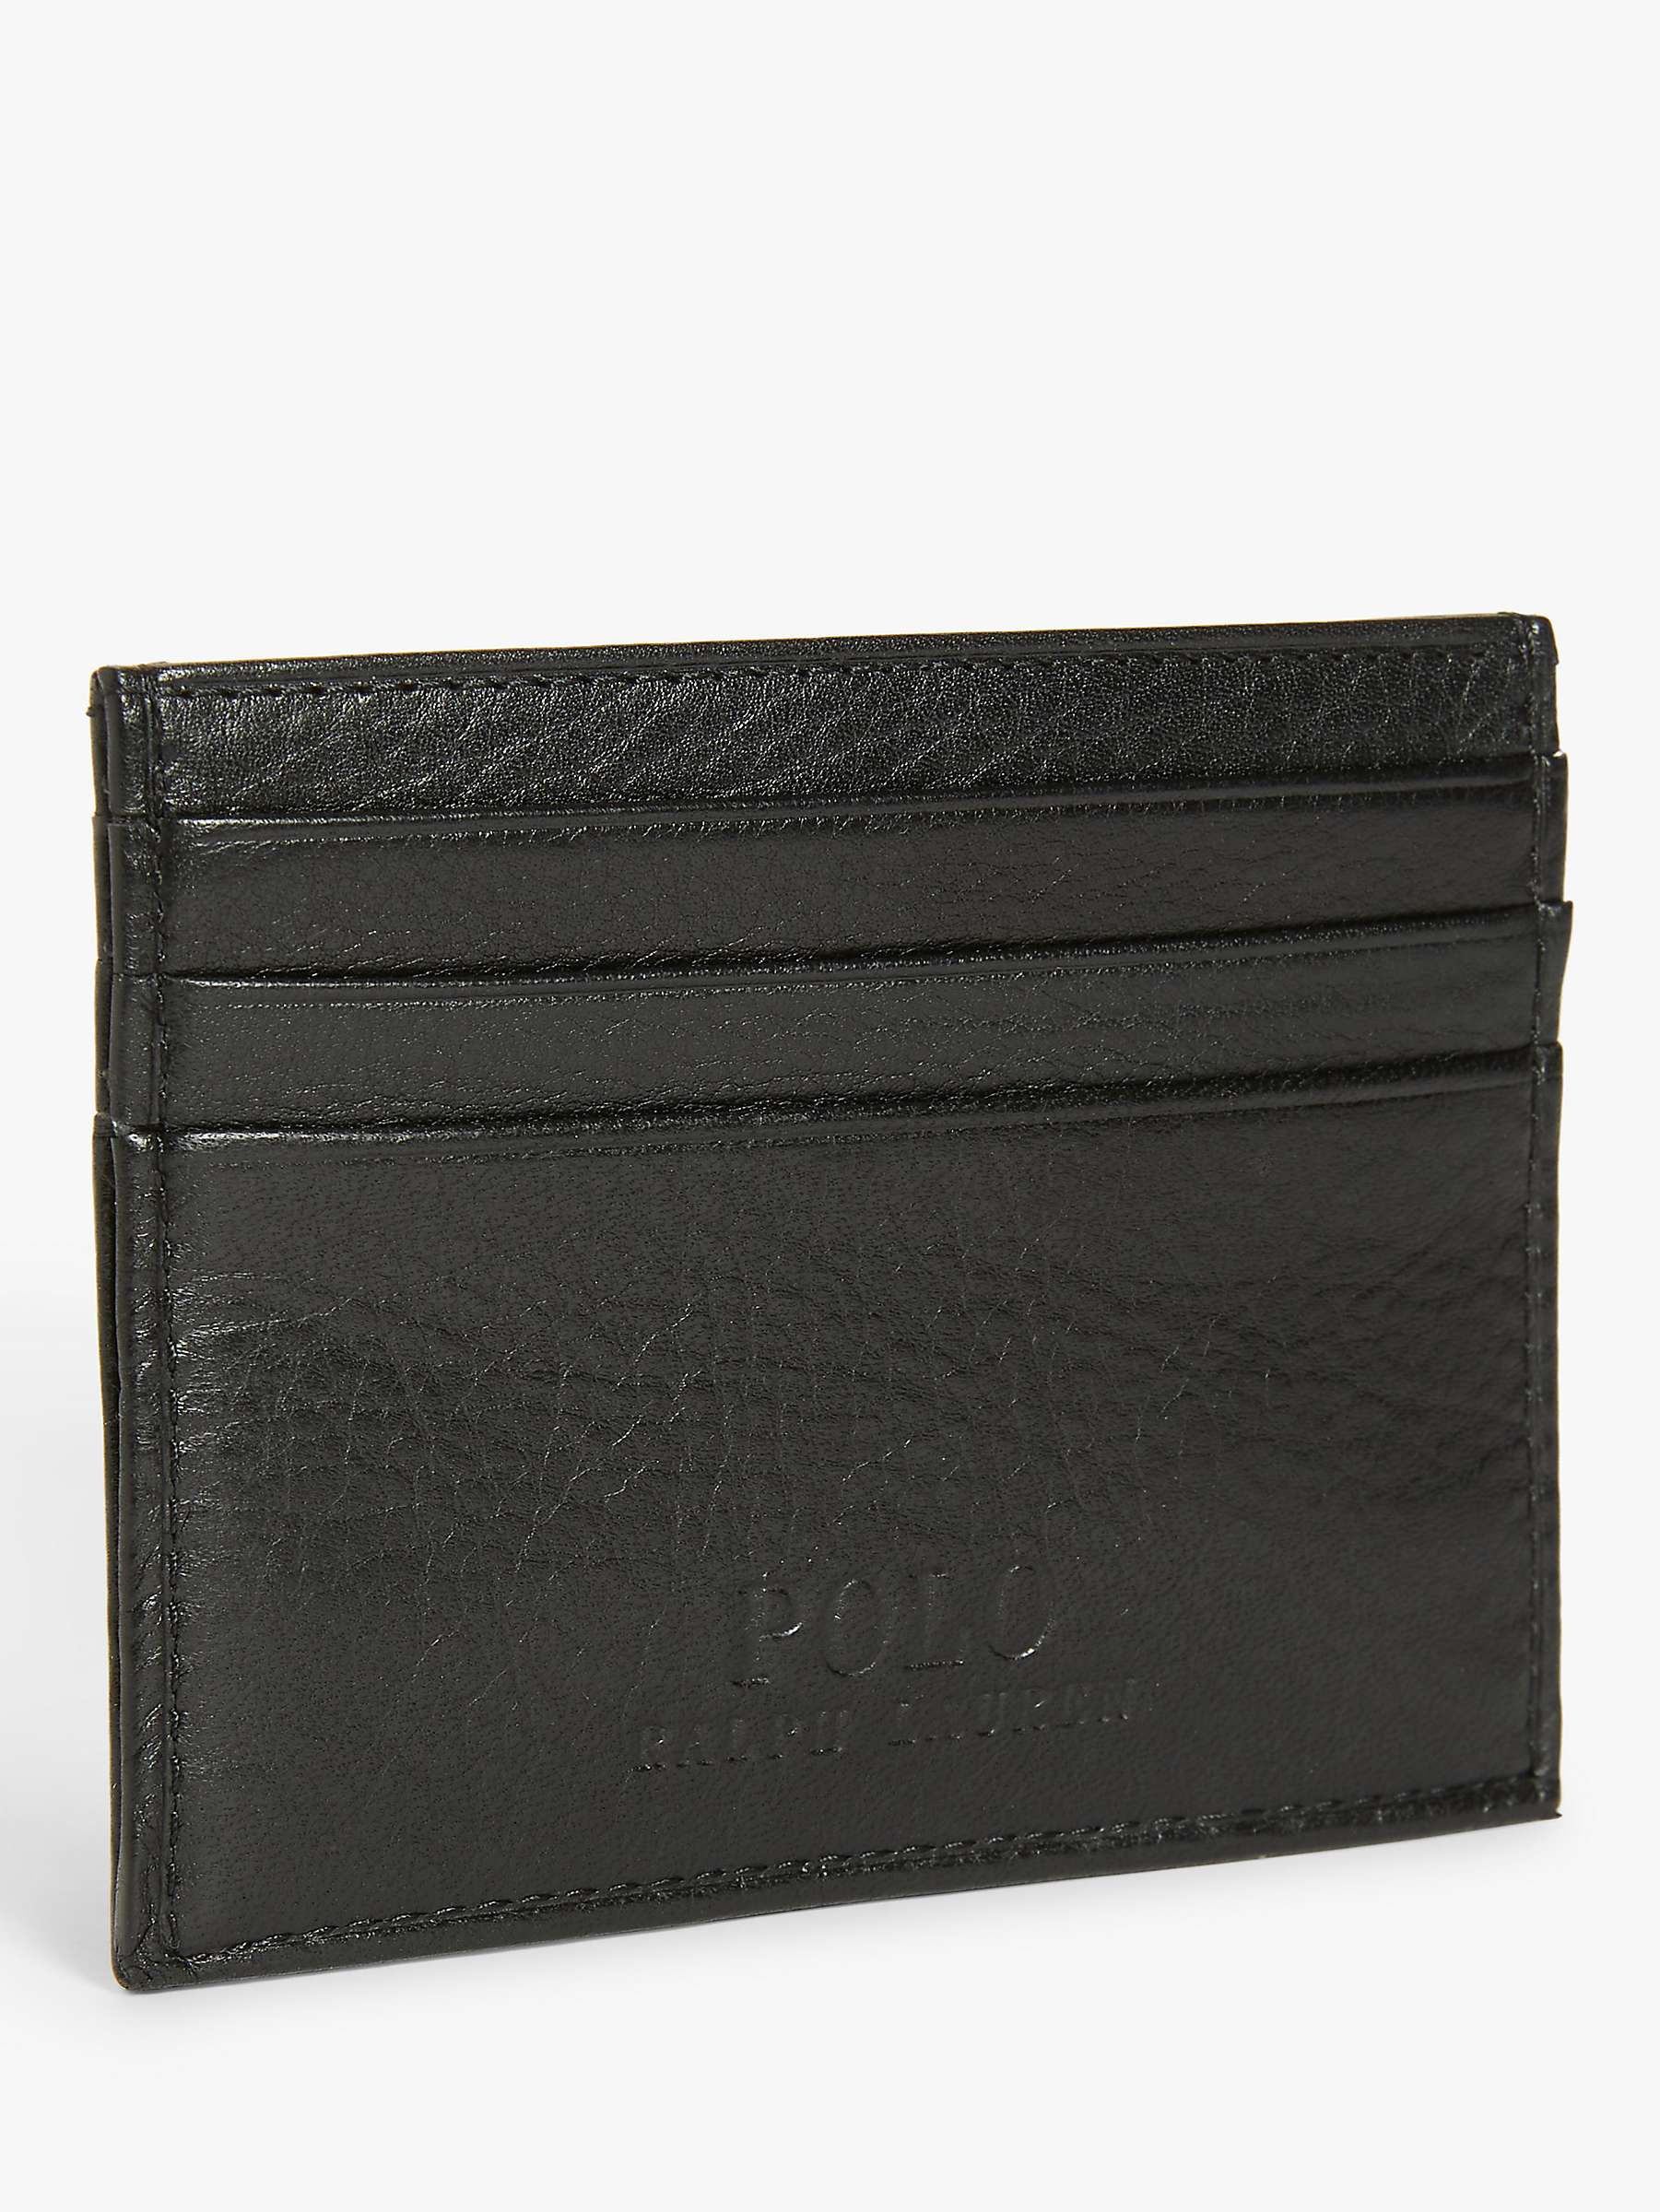 Buy Polo Ralph Lauren Pebble Leather Card Holder Online at johnlewis.com